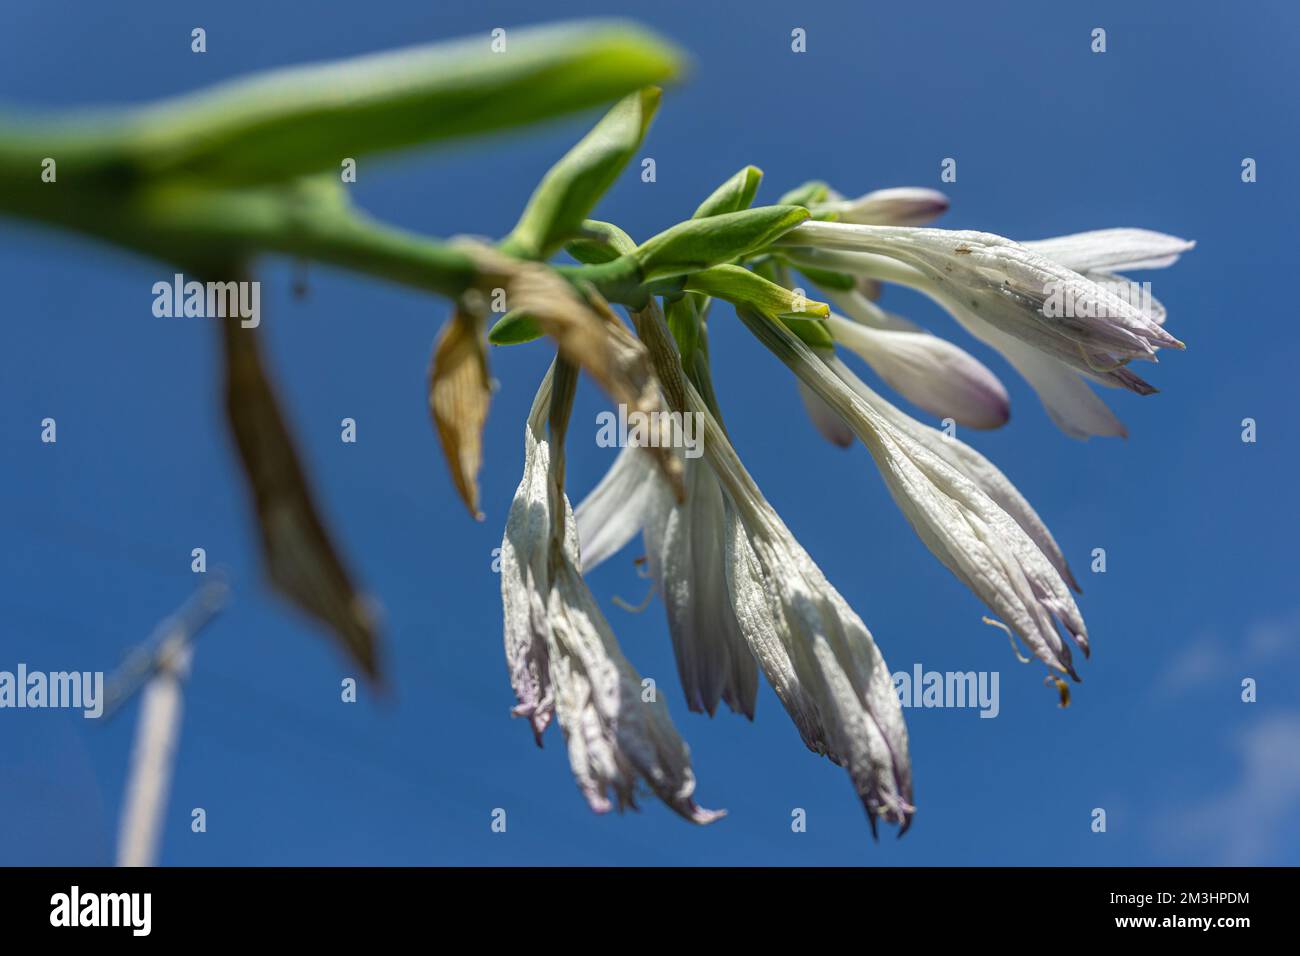 Withered and wilted tulip flowers against a background of blue sky Stock Photo